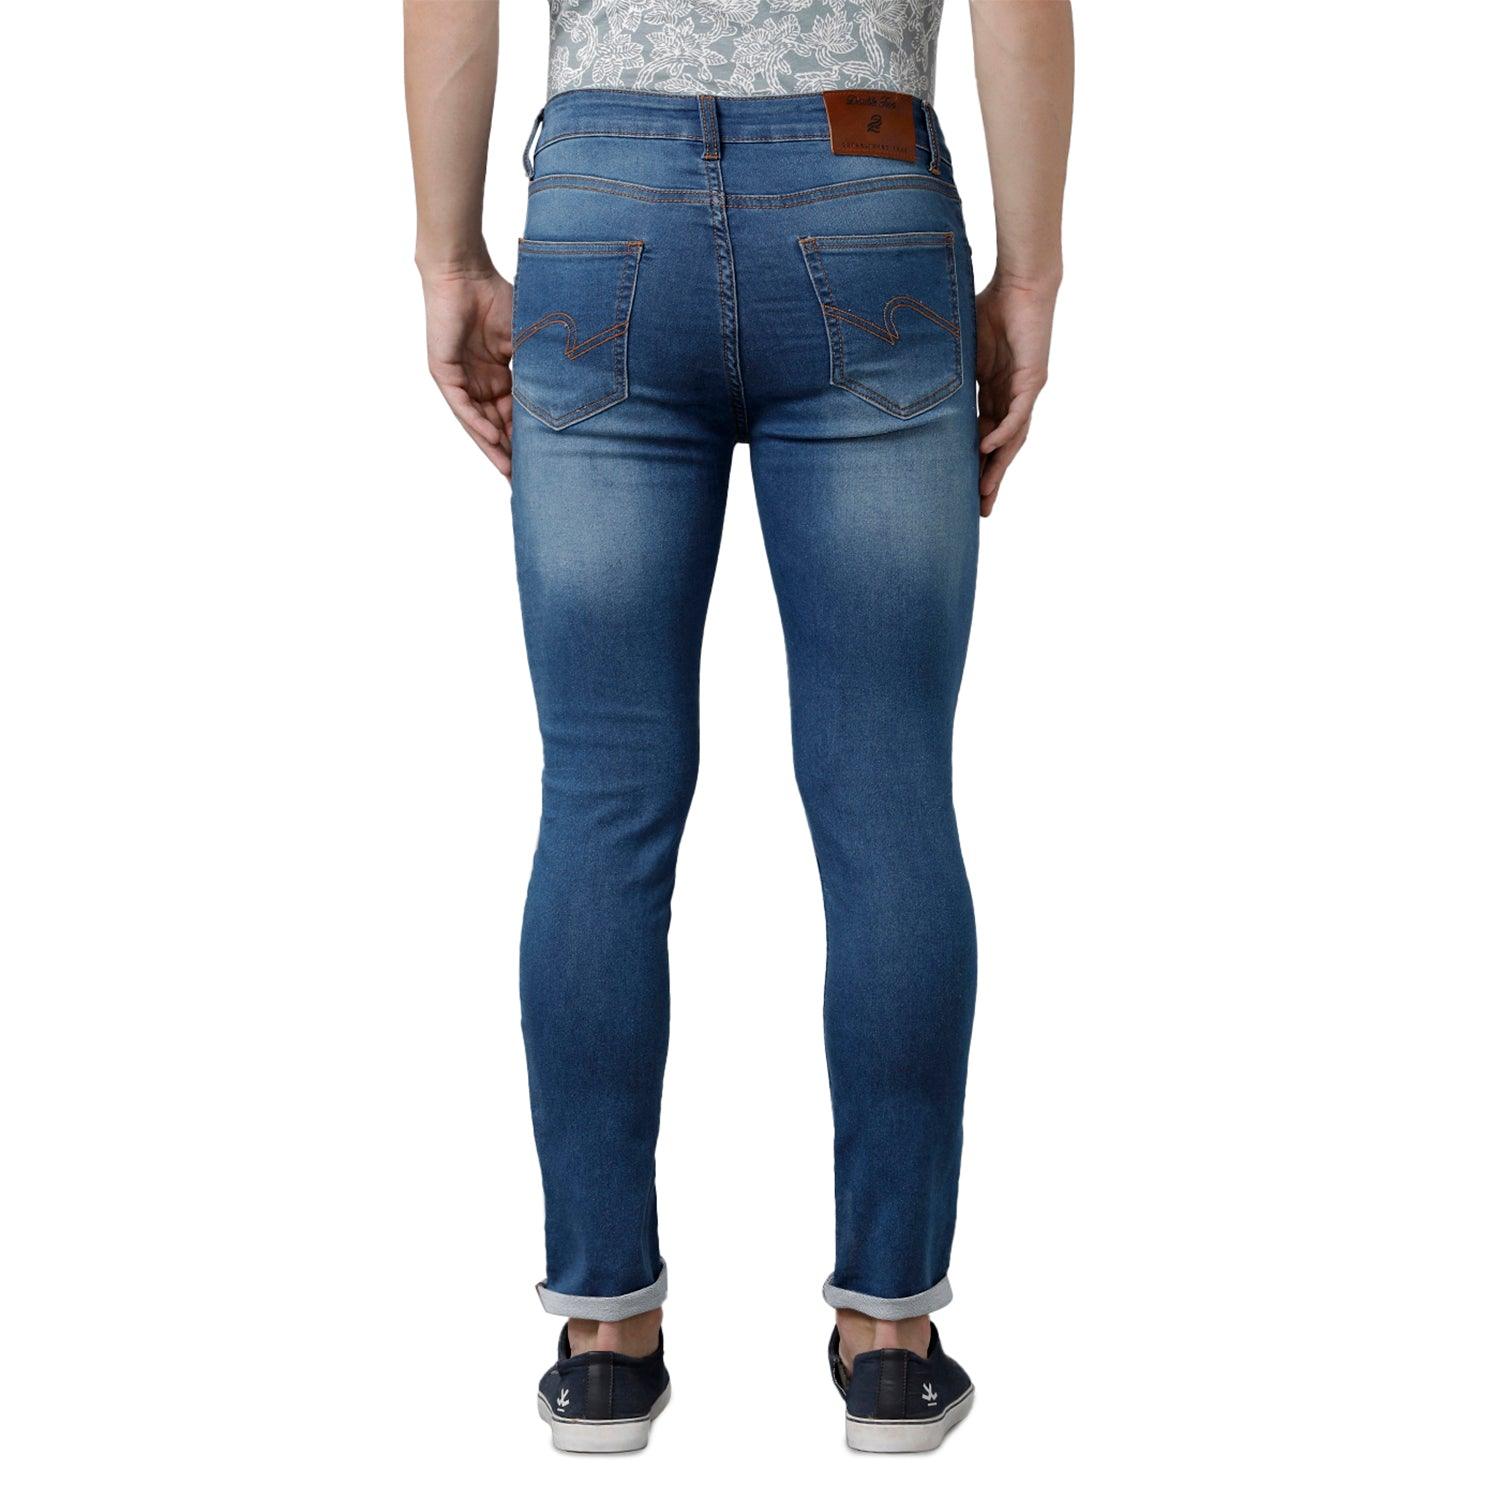 Blue Solid Jeans Lean Fit - Double Two